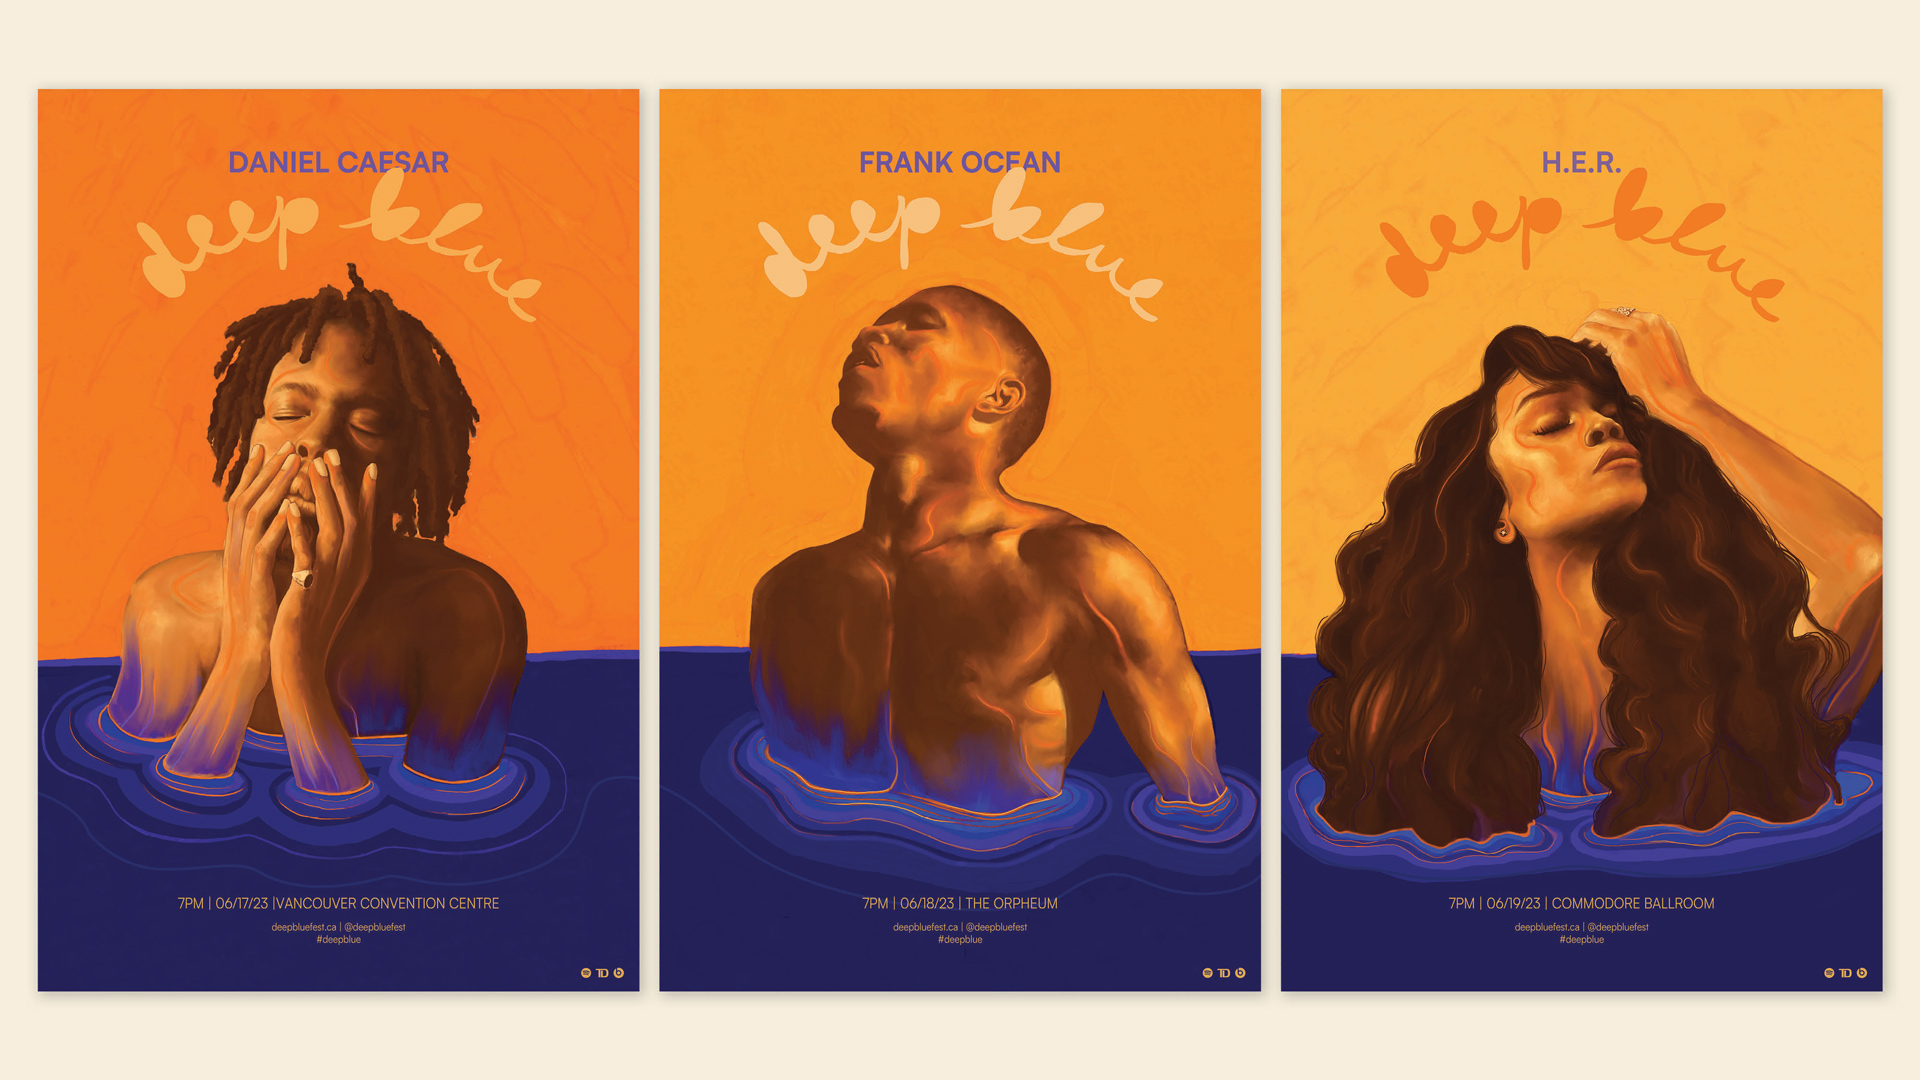 Three posters showcasing R&B artists Daniel Caesar, Frank Ocean, and H.E.R. emerging out of deep blue water into the light.